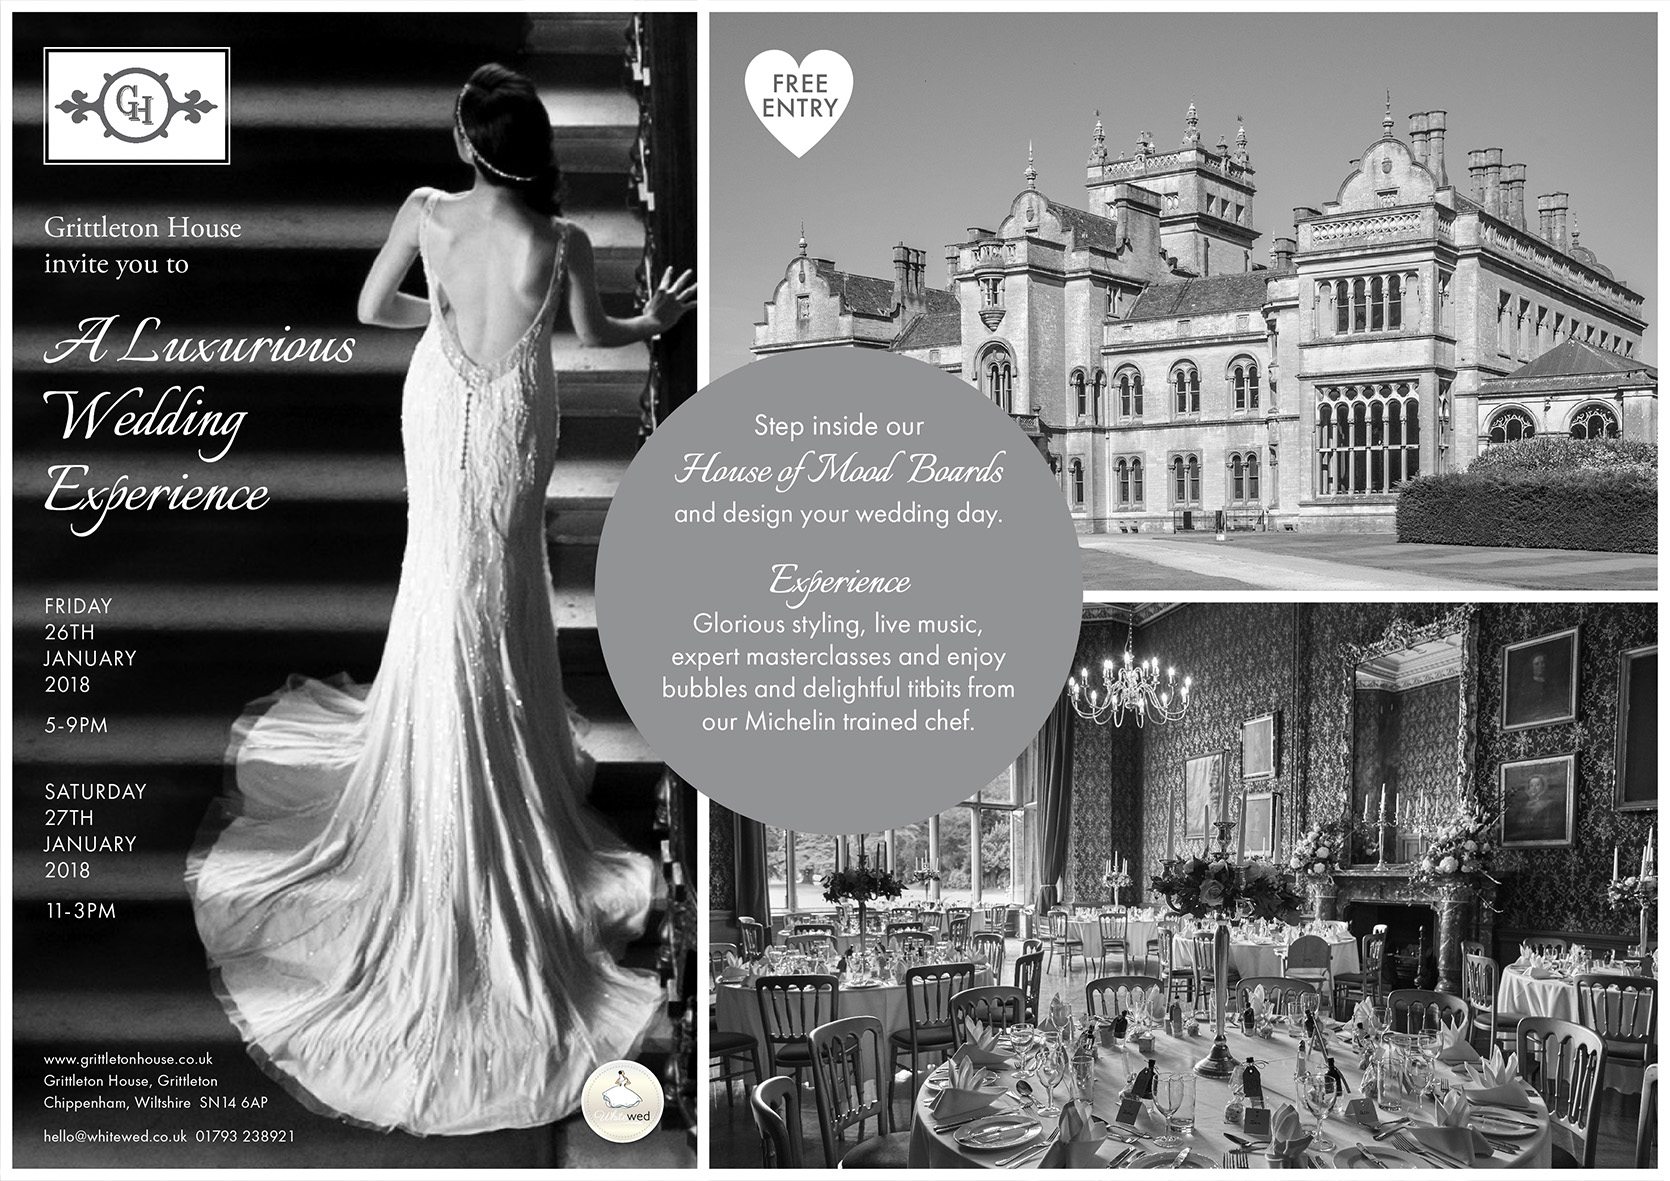 Grittleton House brings Pinterest to life with the ultimate luxurious wedding experience